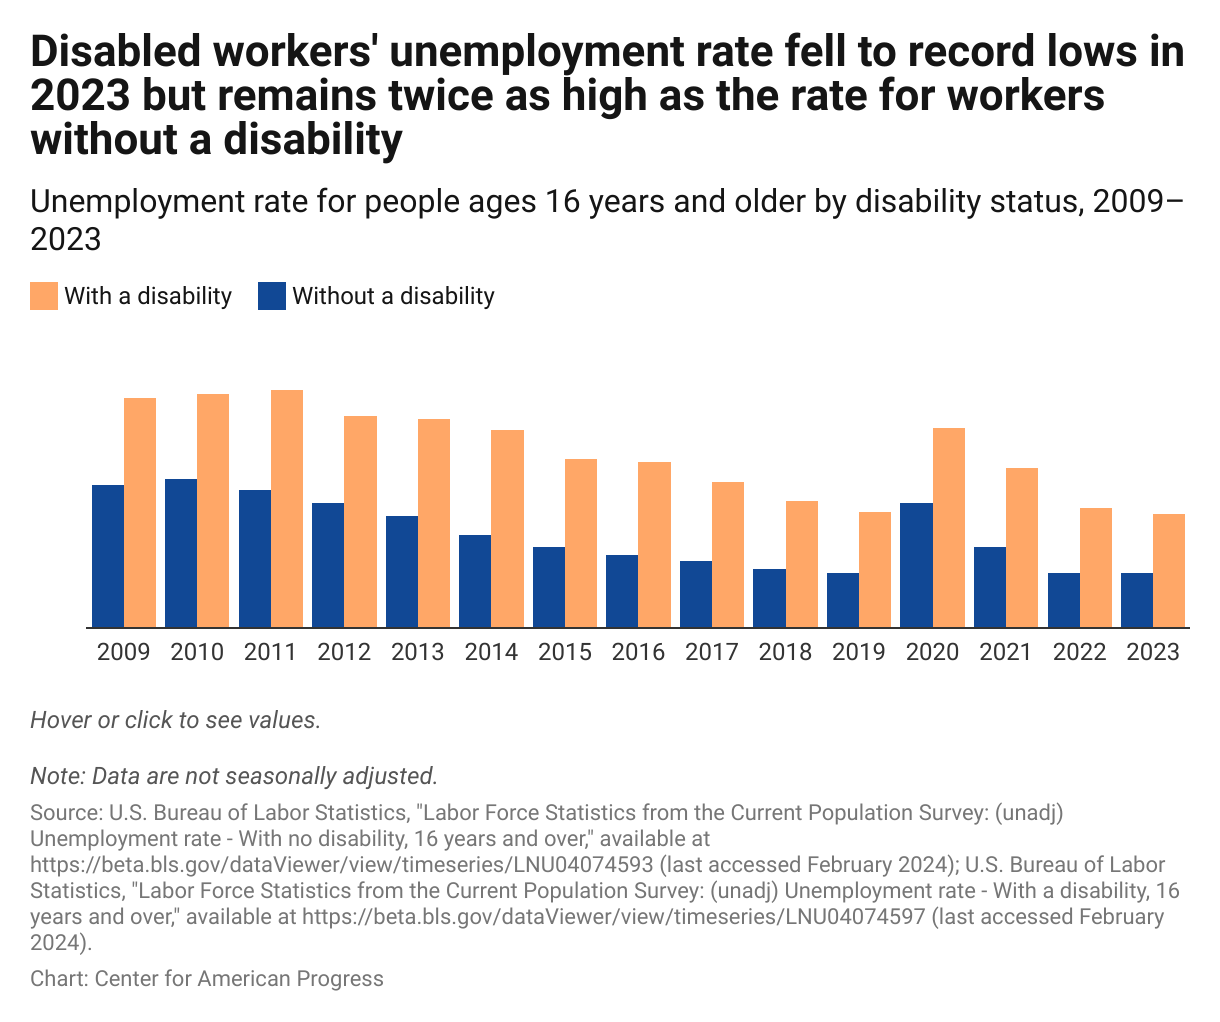 Grouped column graph showing that unemployment rates remain twice as high for workers with a disability compared with workers without a disability; for example, workers with a disability had an unemployment rate of 7.2 percent in 2023 compared with workers without a disability (3.5 percent in that same year).